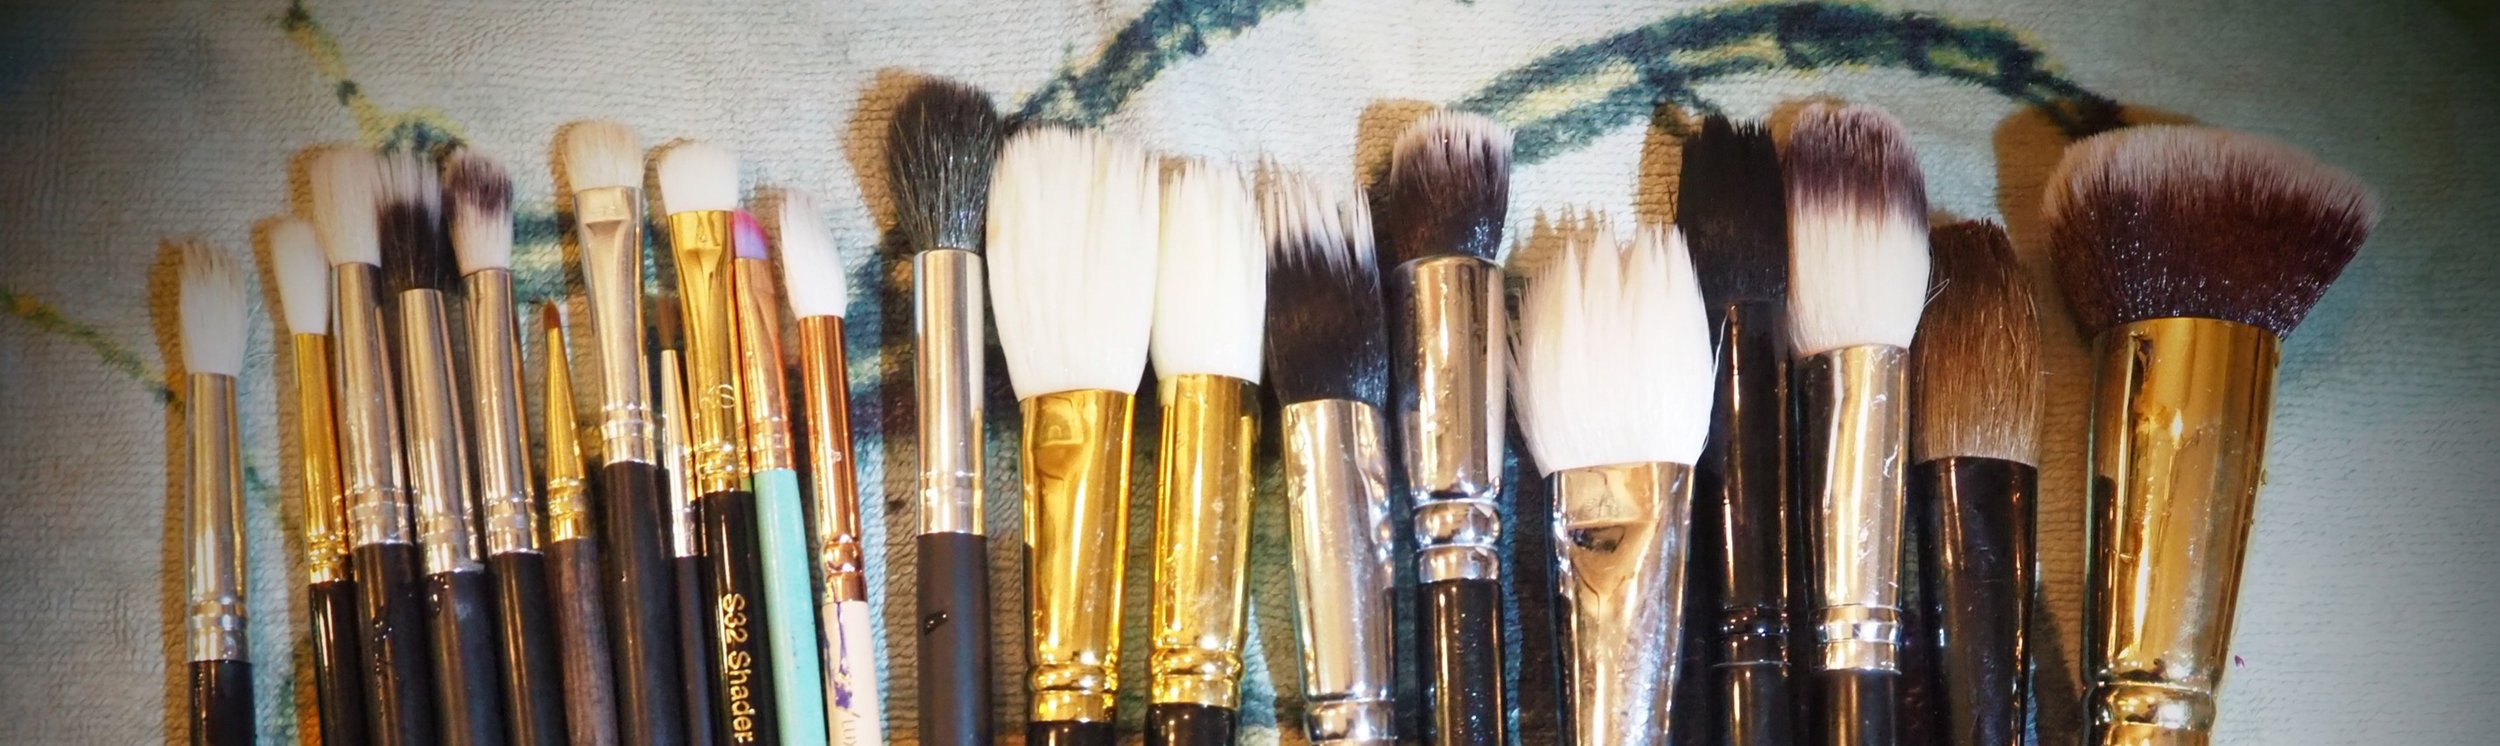 We Tested Different Makeup Brush Cleaning Tools To See Which Ones